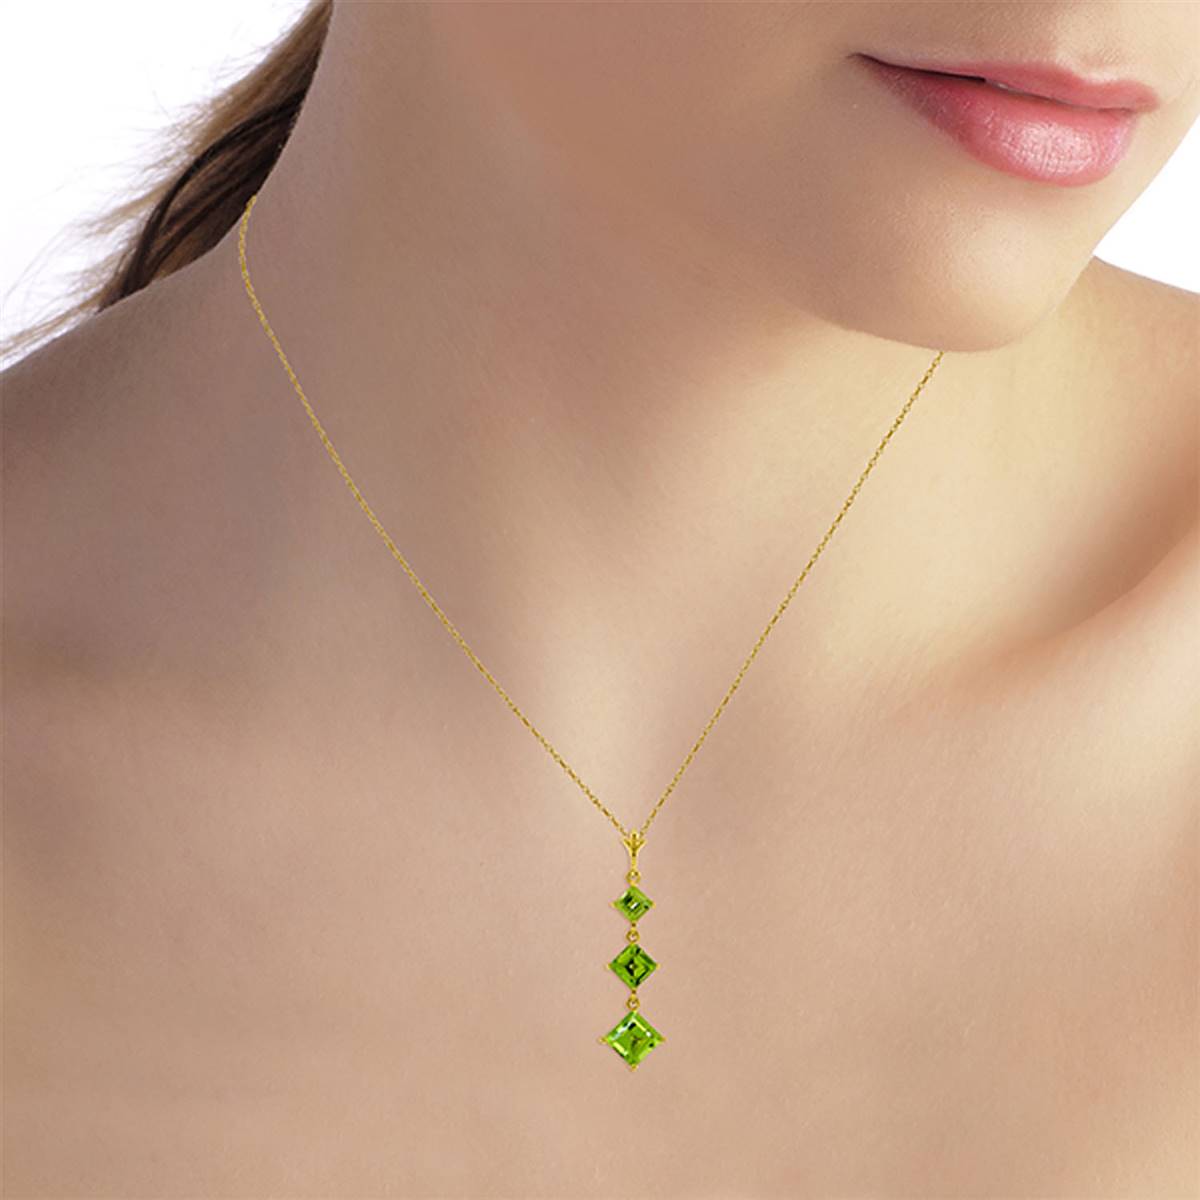 2.4 Carat 14K Solid Yellow Gold Seal Your Love Peridot Necklace